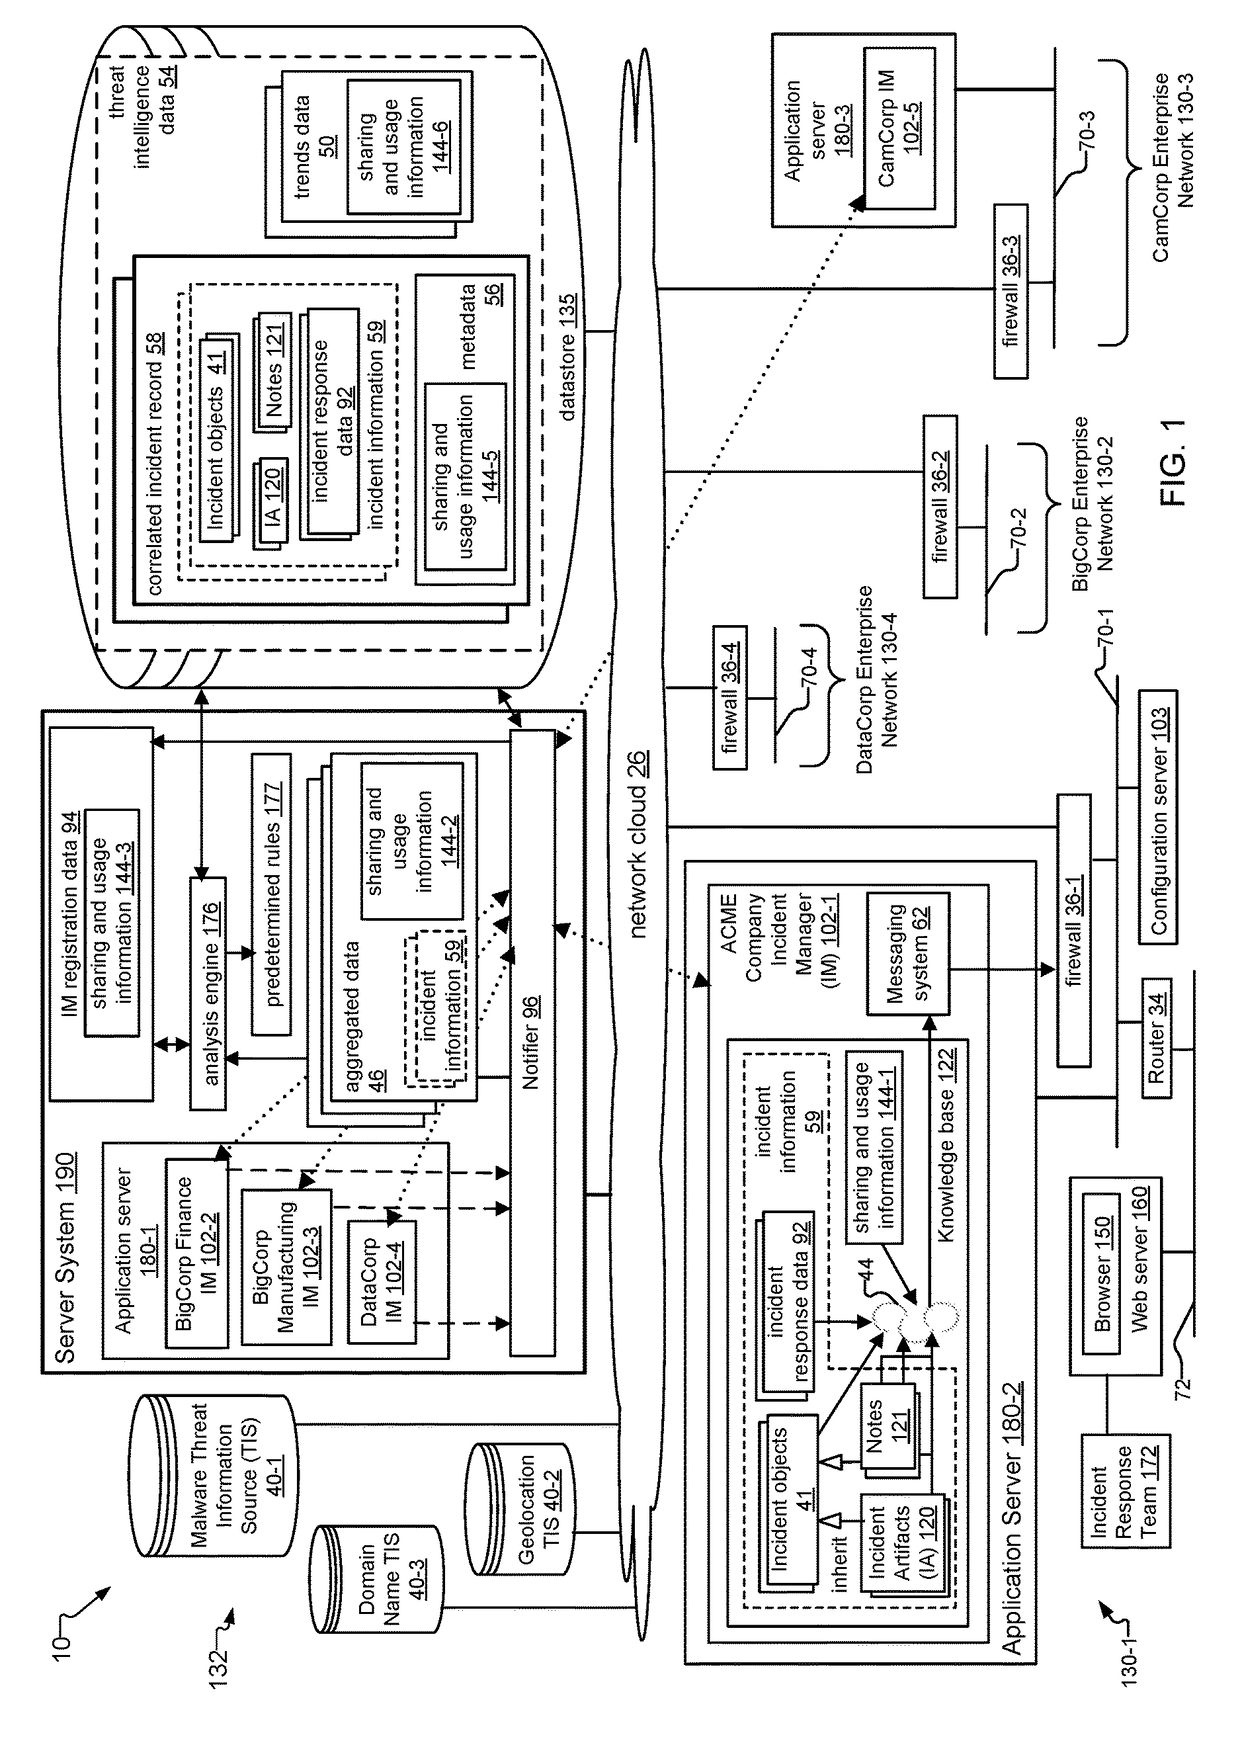 Data Security Incident Correlation and Dissemination System and Method